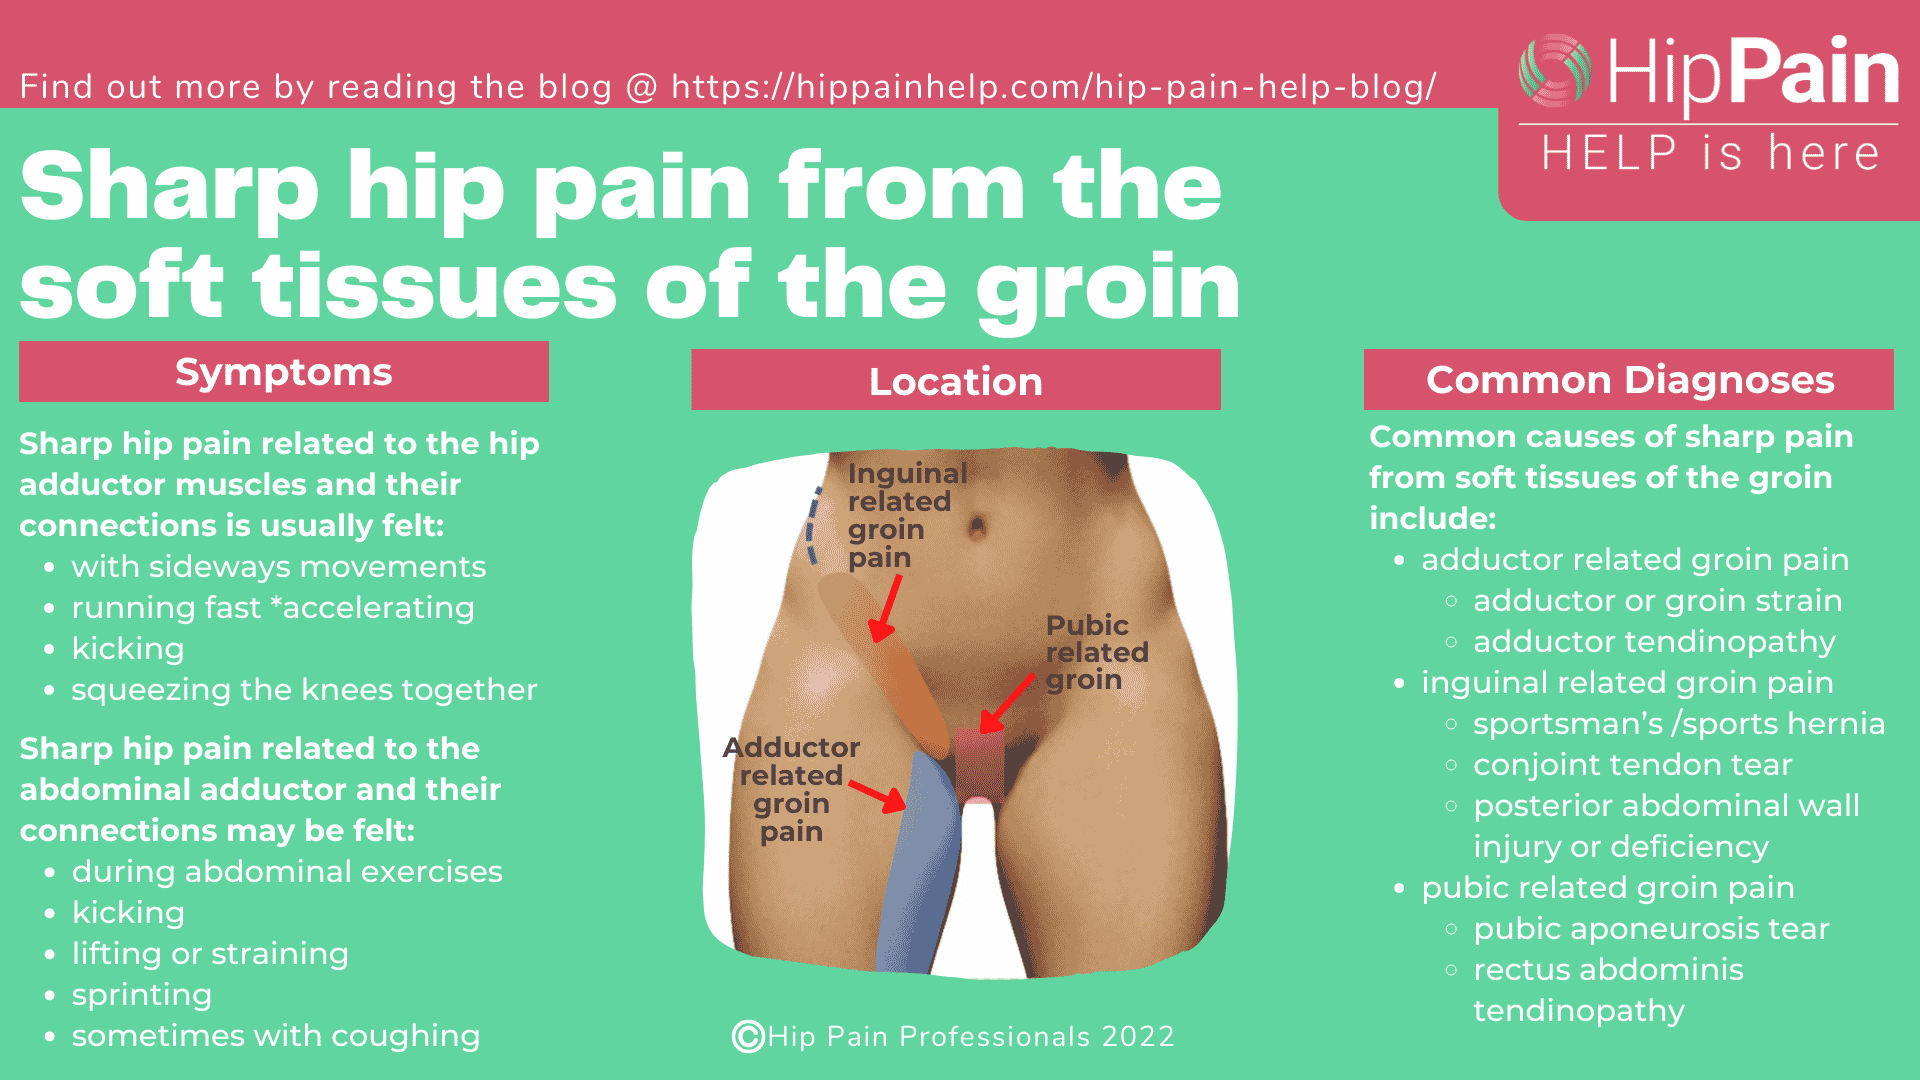 10 Causes of Female Groin Pain